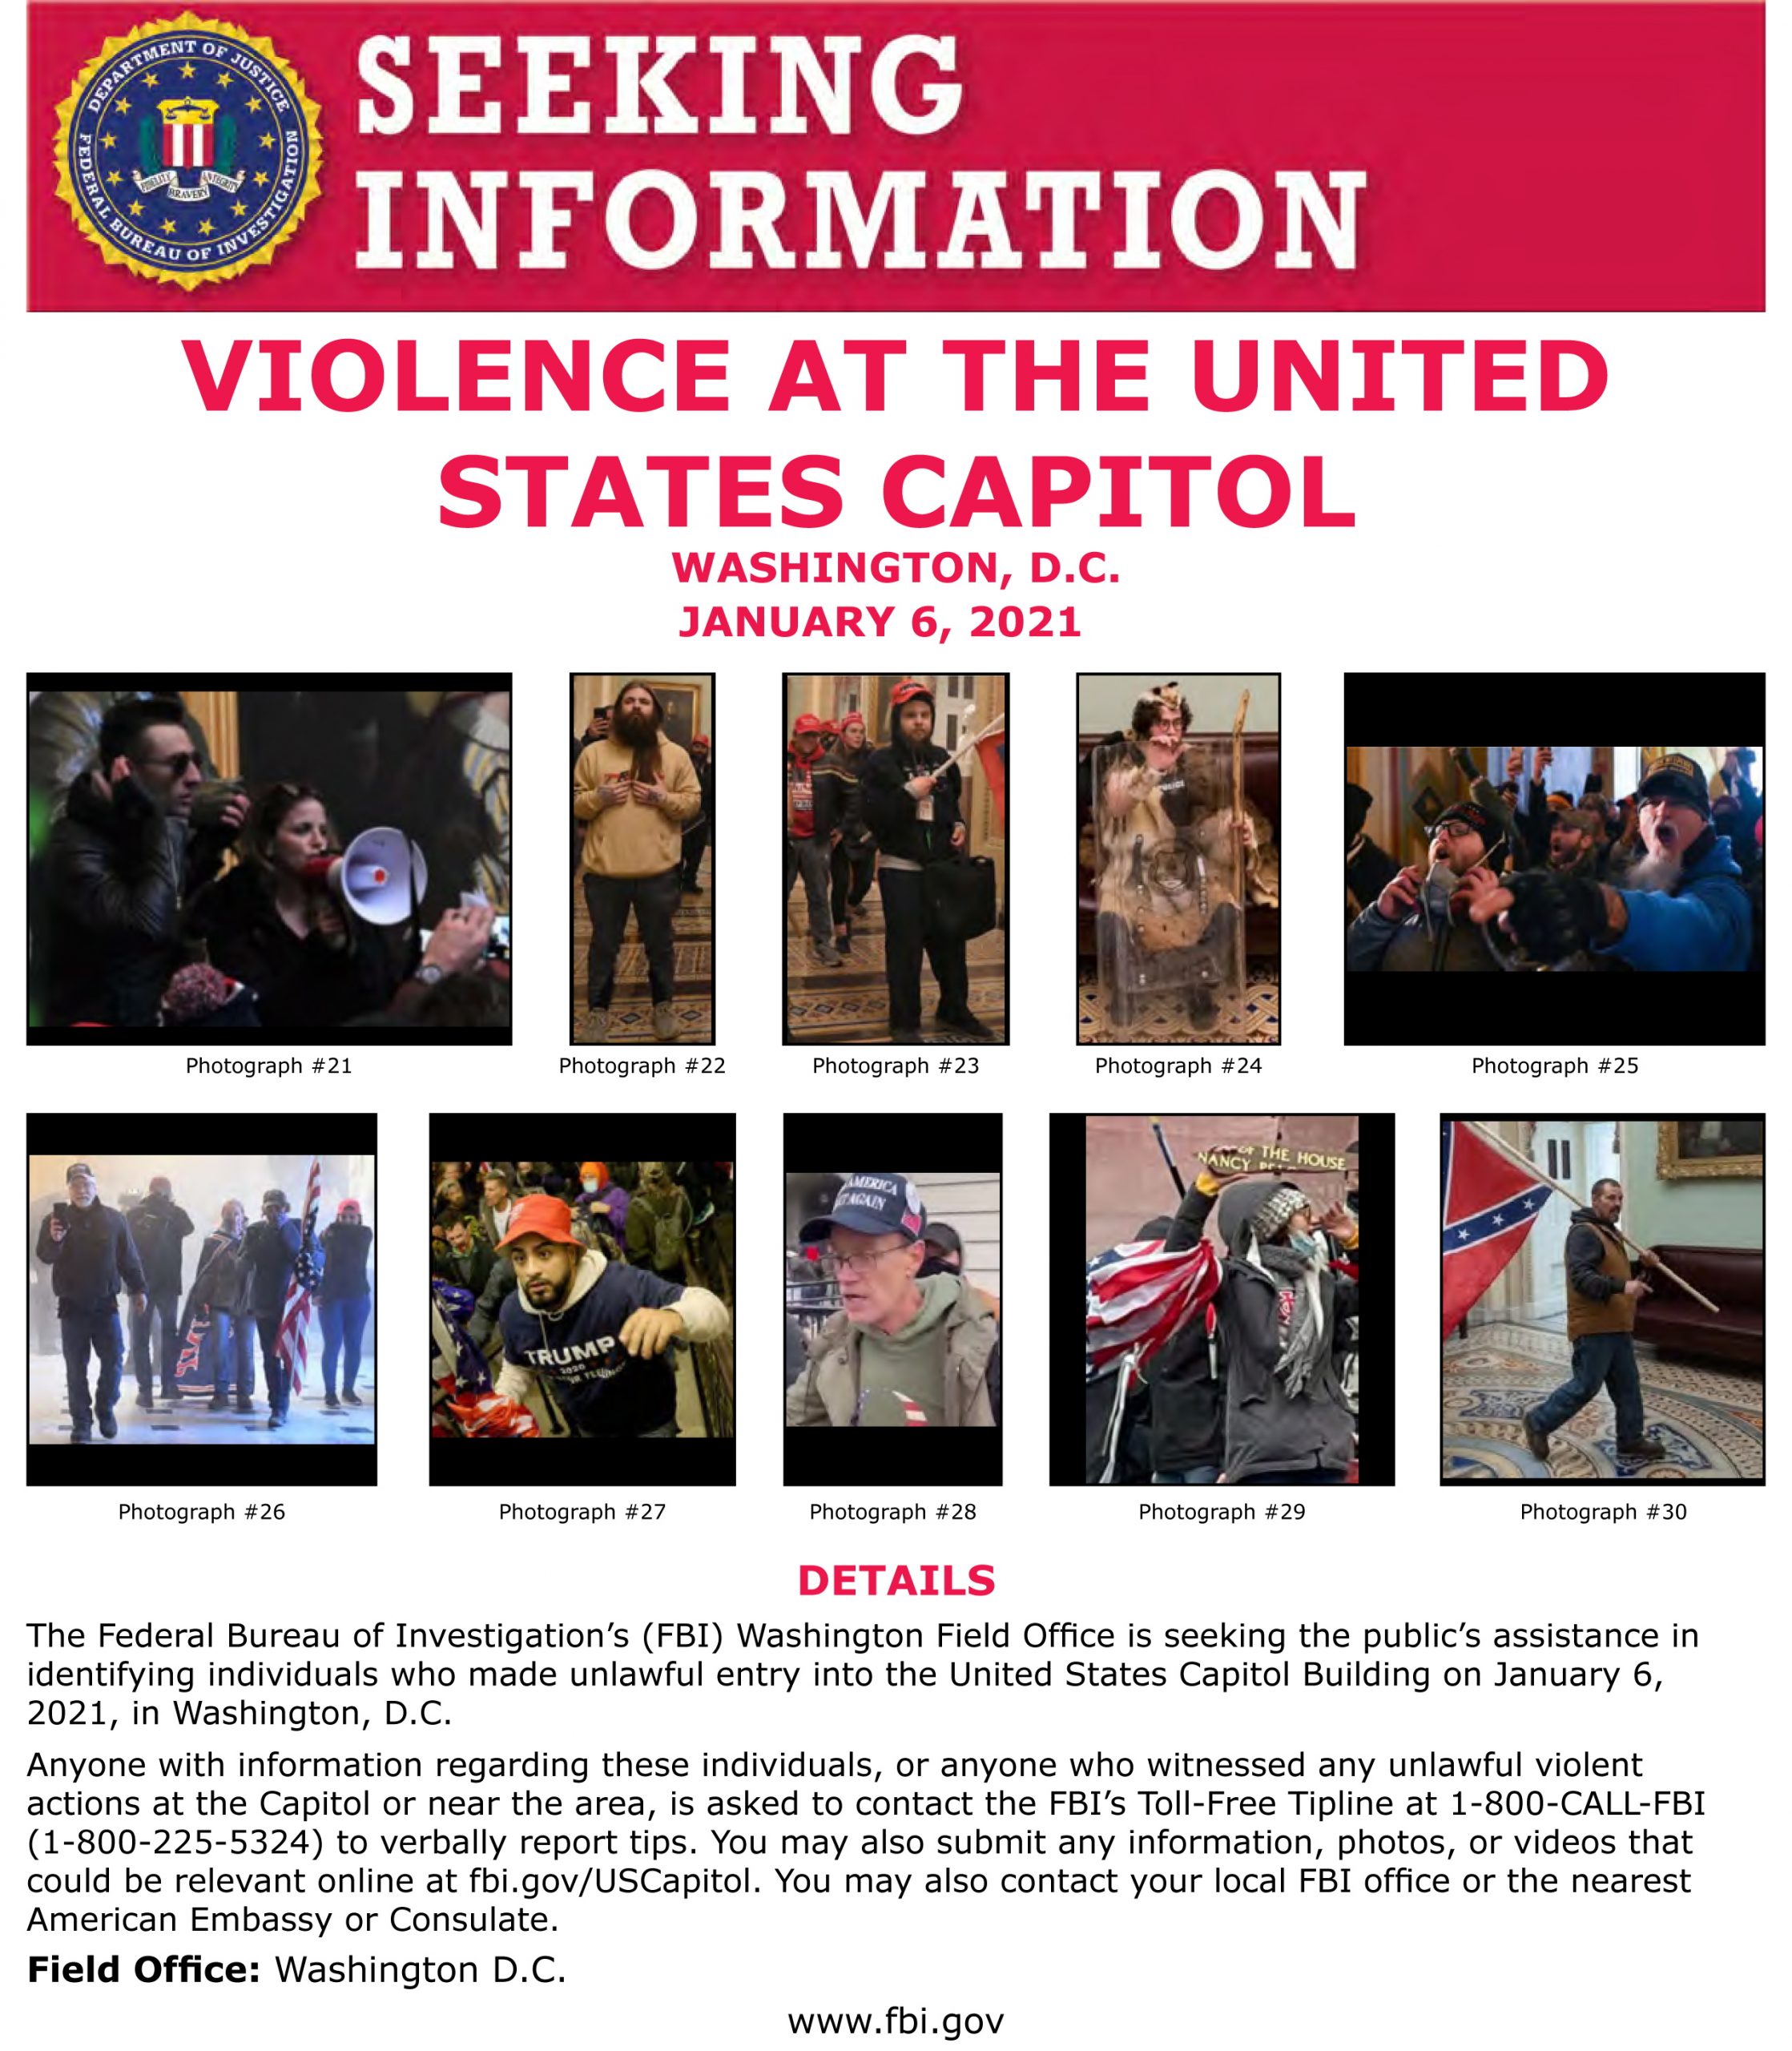 epa08926736 A handout photo made available by the Federal Bureau of Investigation (FBI) shows a notice asking for assistance in identifying suspects in connection with riots inside the US Capitol in Washington, DC, USA, 06 January 2021 (issued 08 January 2021). The FBI is asking the public to help identify persons who took part in a riot at the US Capitol. A crowd of Trump supporters had stormed inside the building, as Congress began counting the electoral college votes. Despite efforts by the mob to stop it, Congress certified Joe Biden's presidential election victory over Donald J. Trump.  EPA/FBI HANDOUT  HANDOUT EDITORIAL USE ONLY/NO SALES